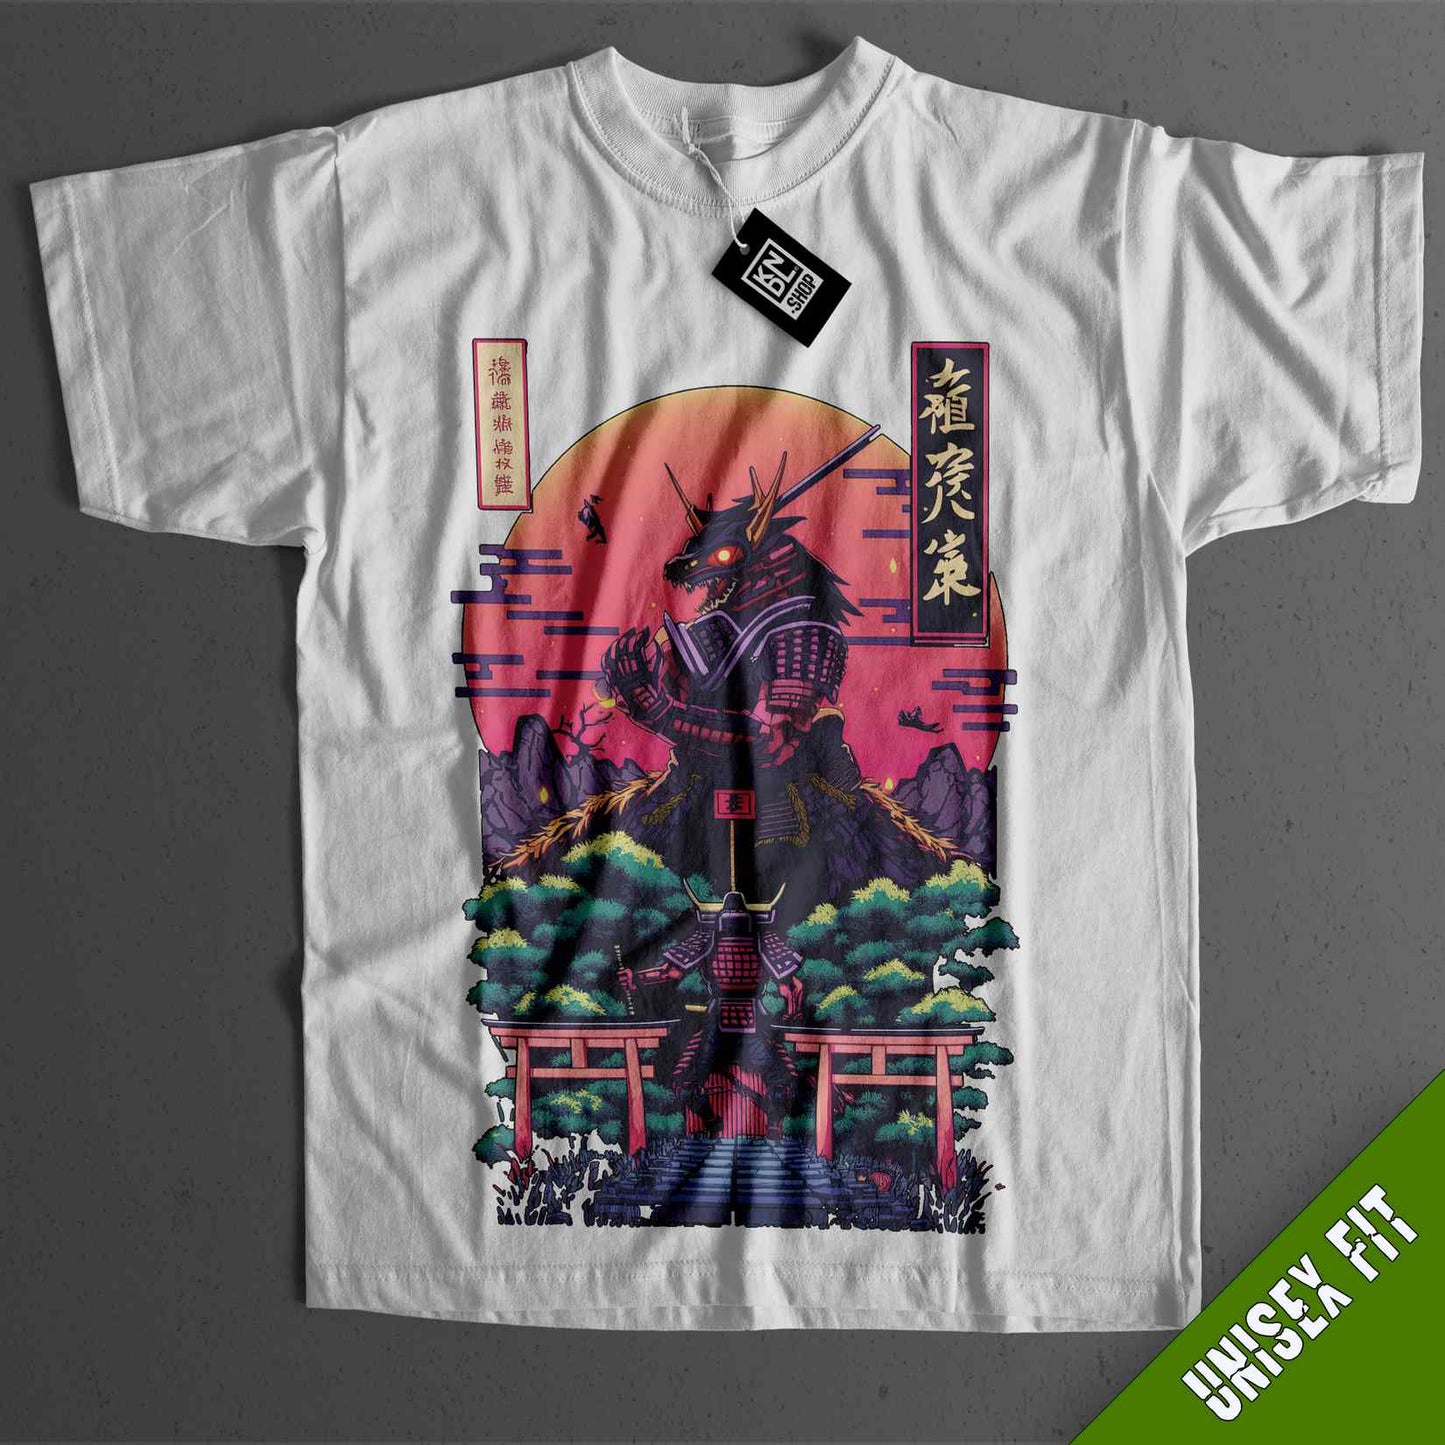 a white t - shirt with an image of a godzilla on it